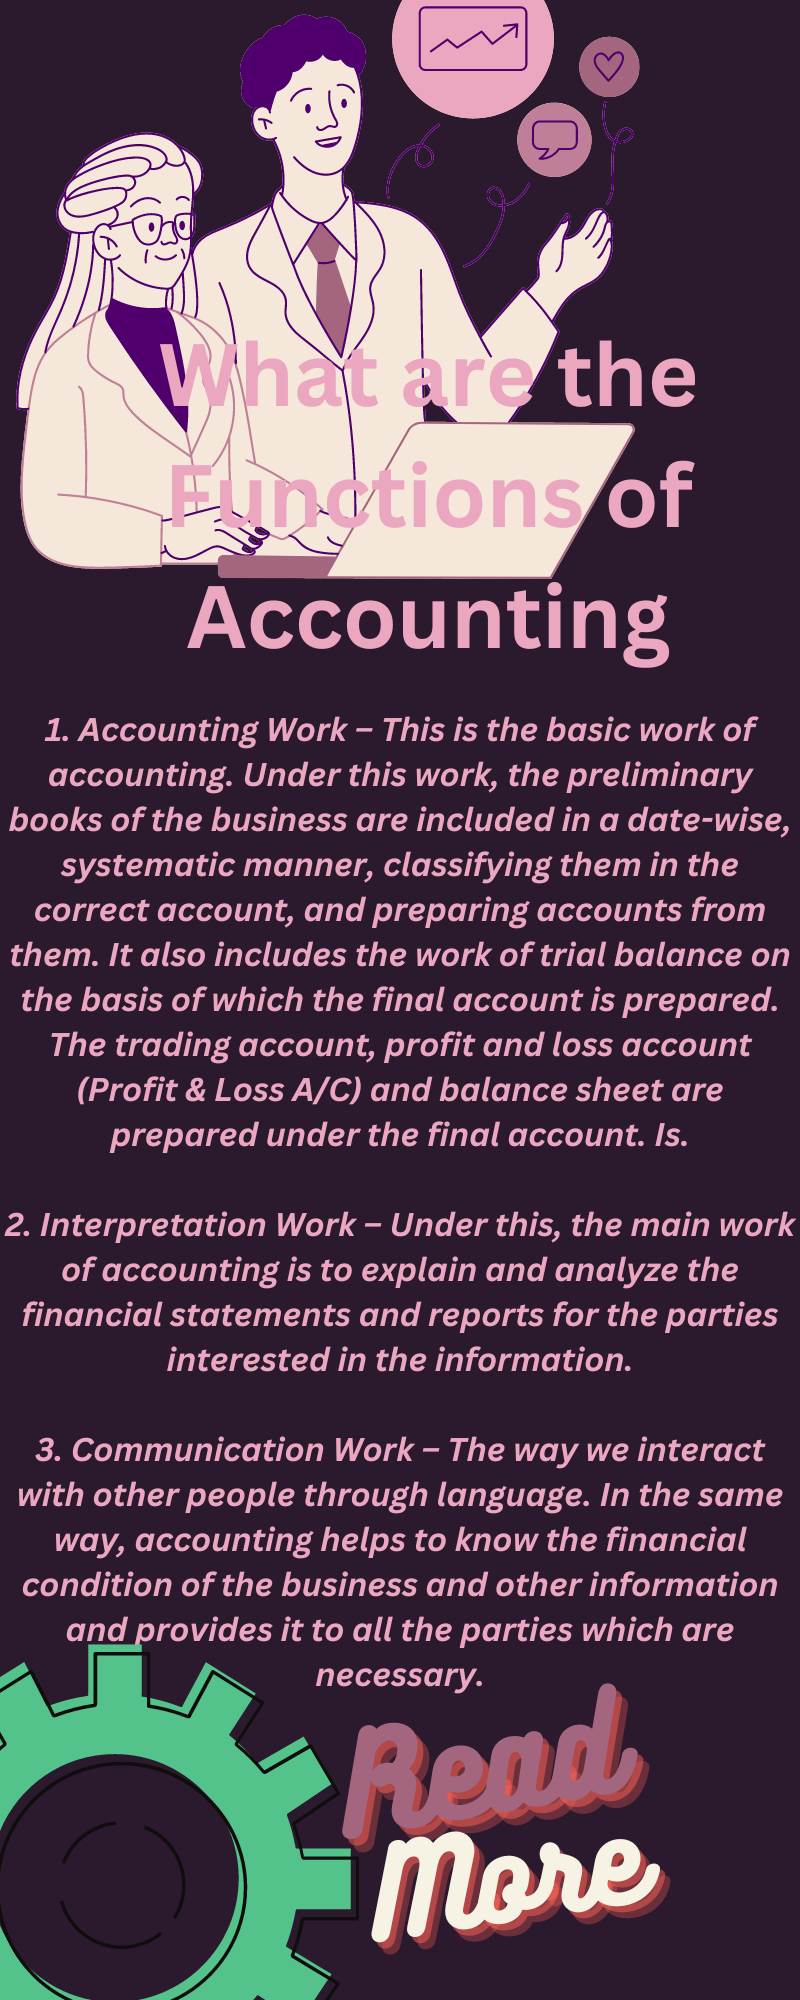 What are the Functions of Accounting